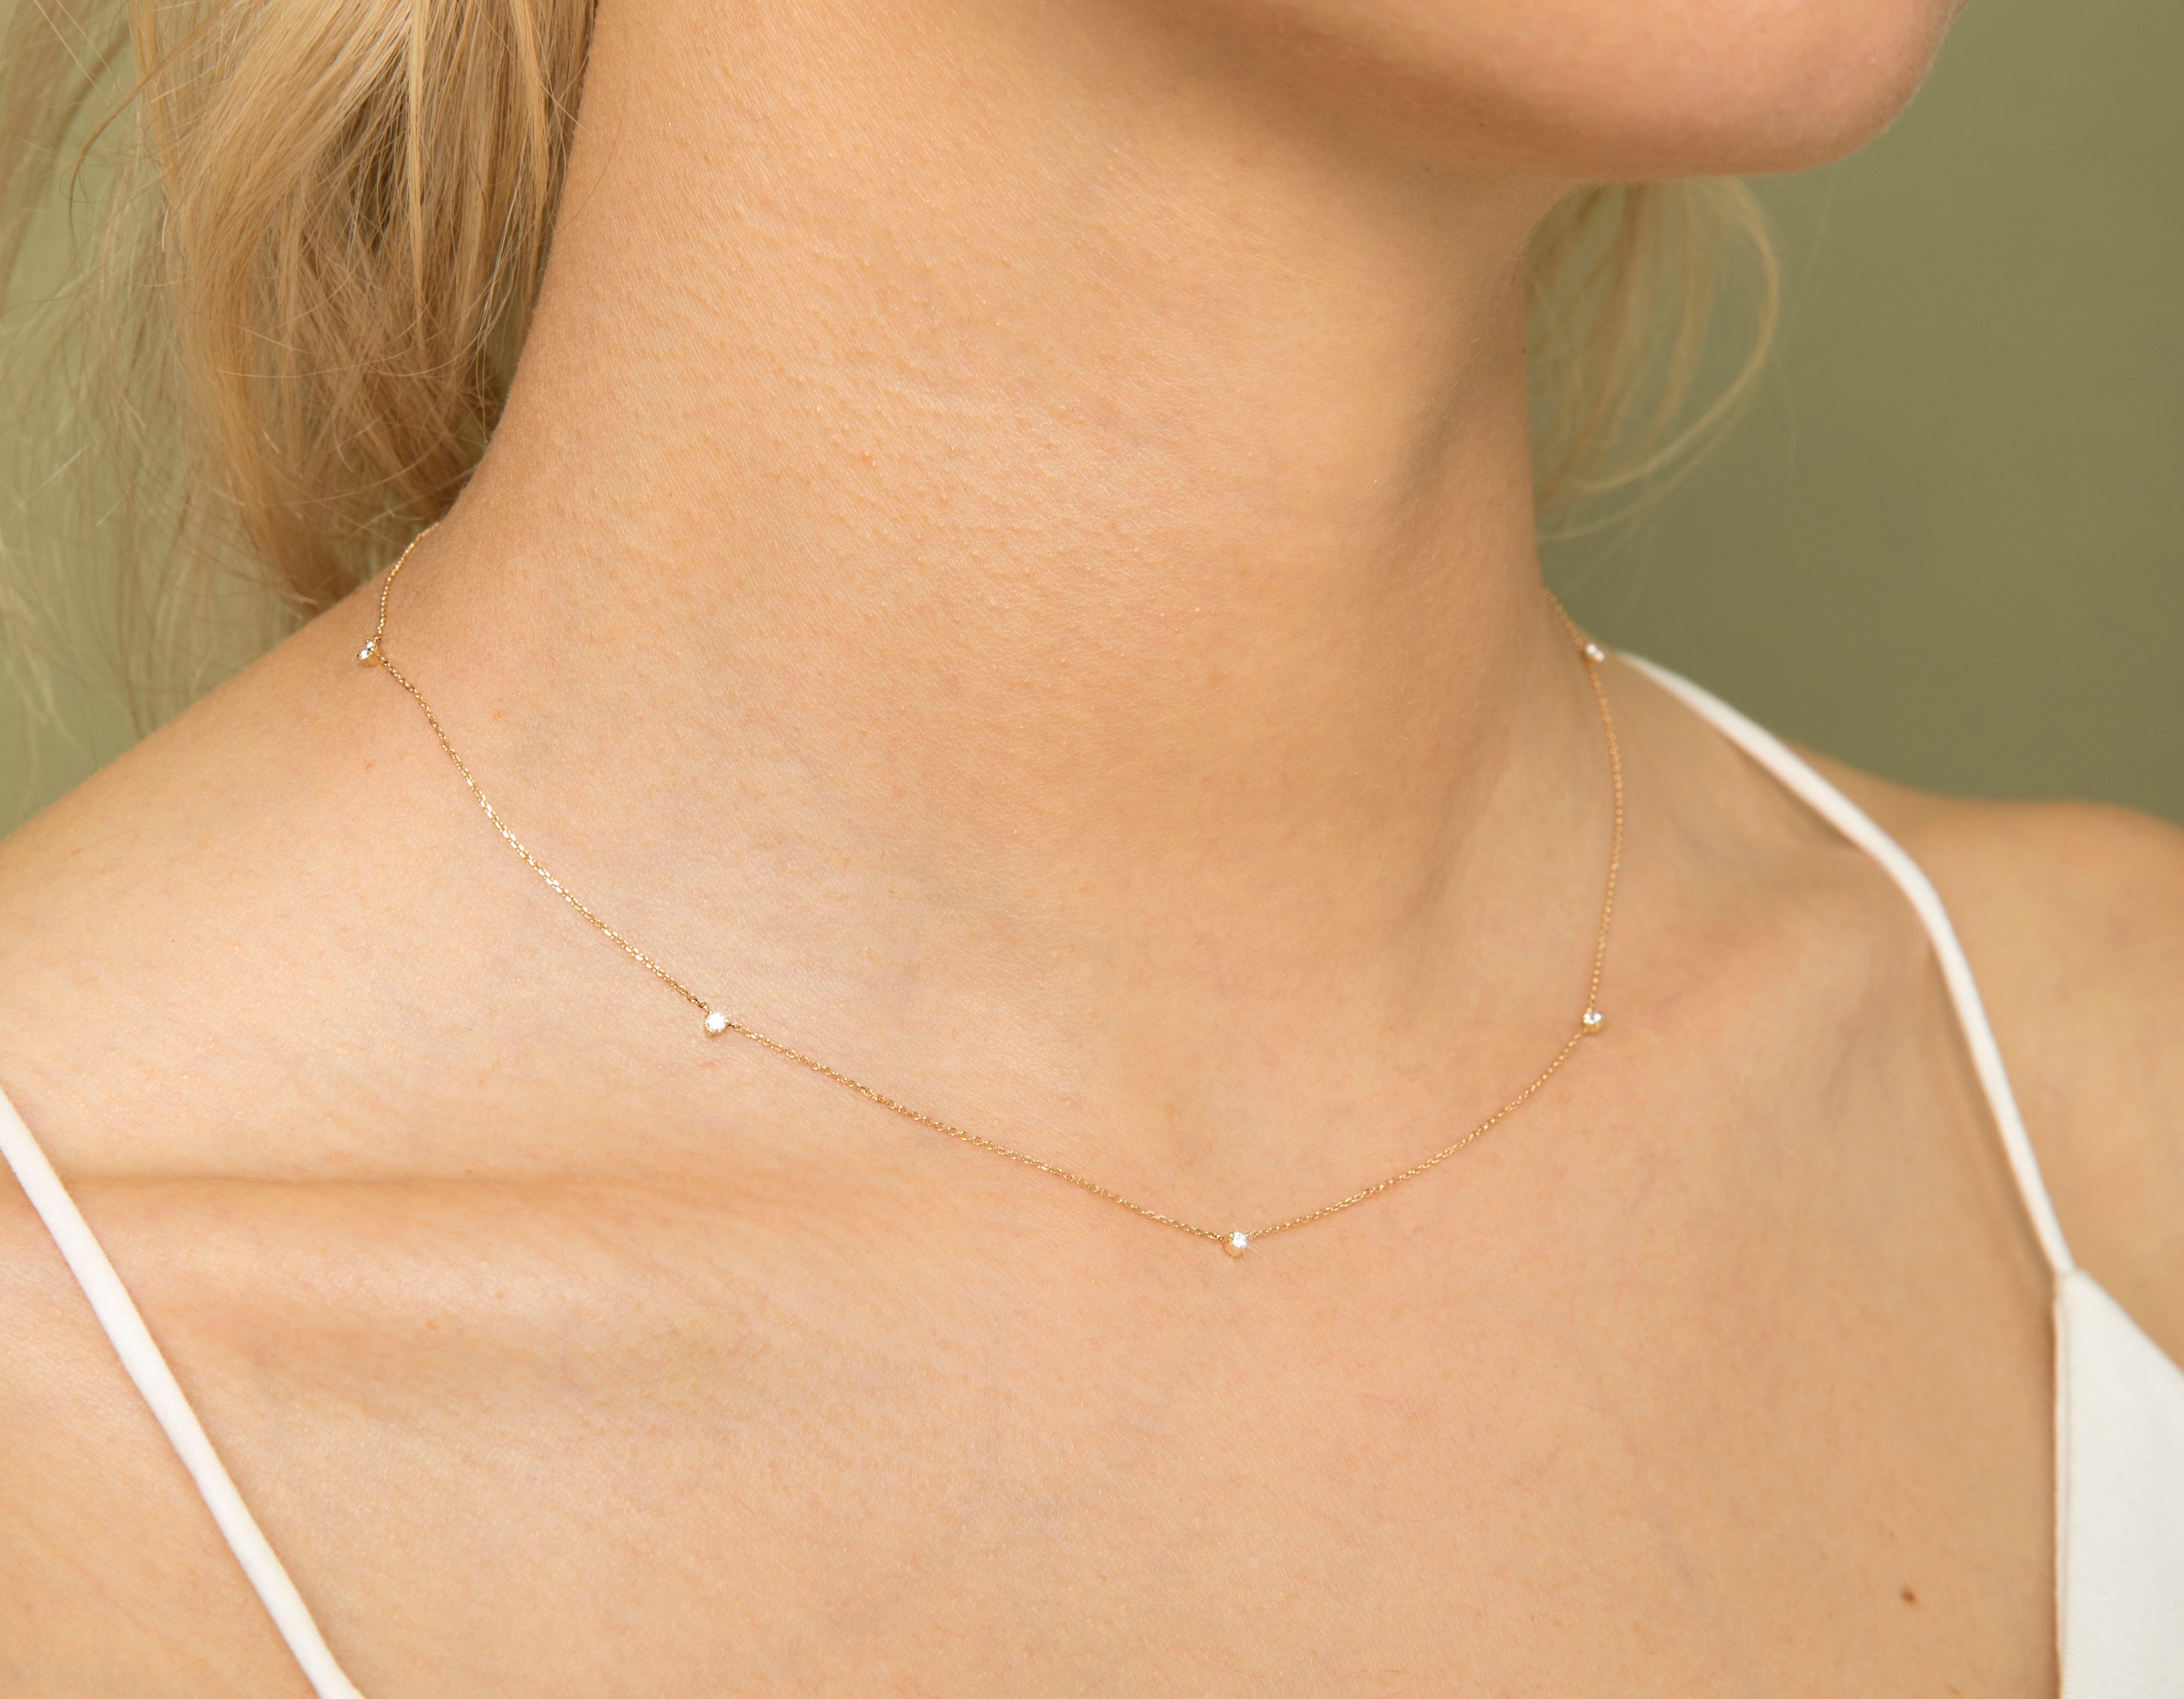 thin necklace with small diamond